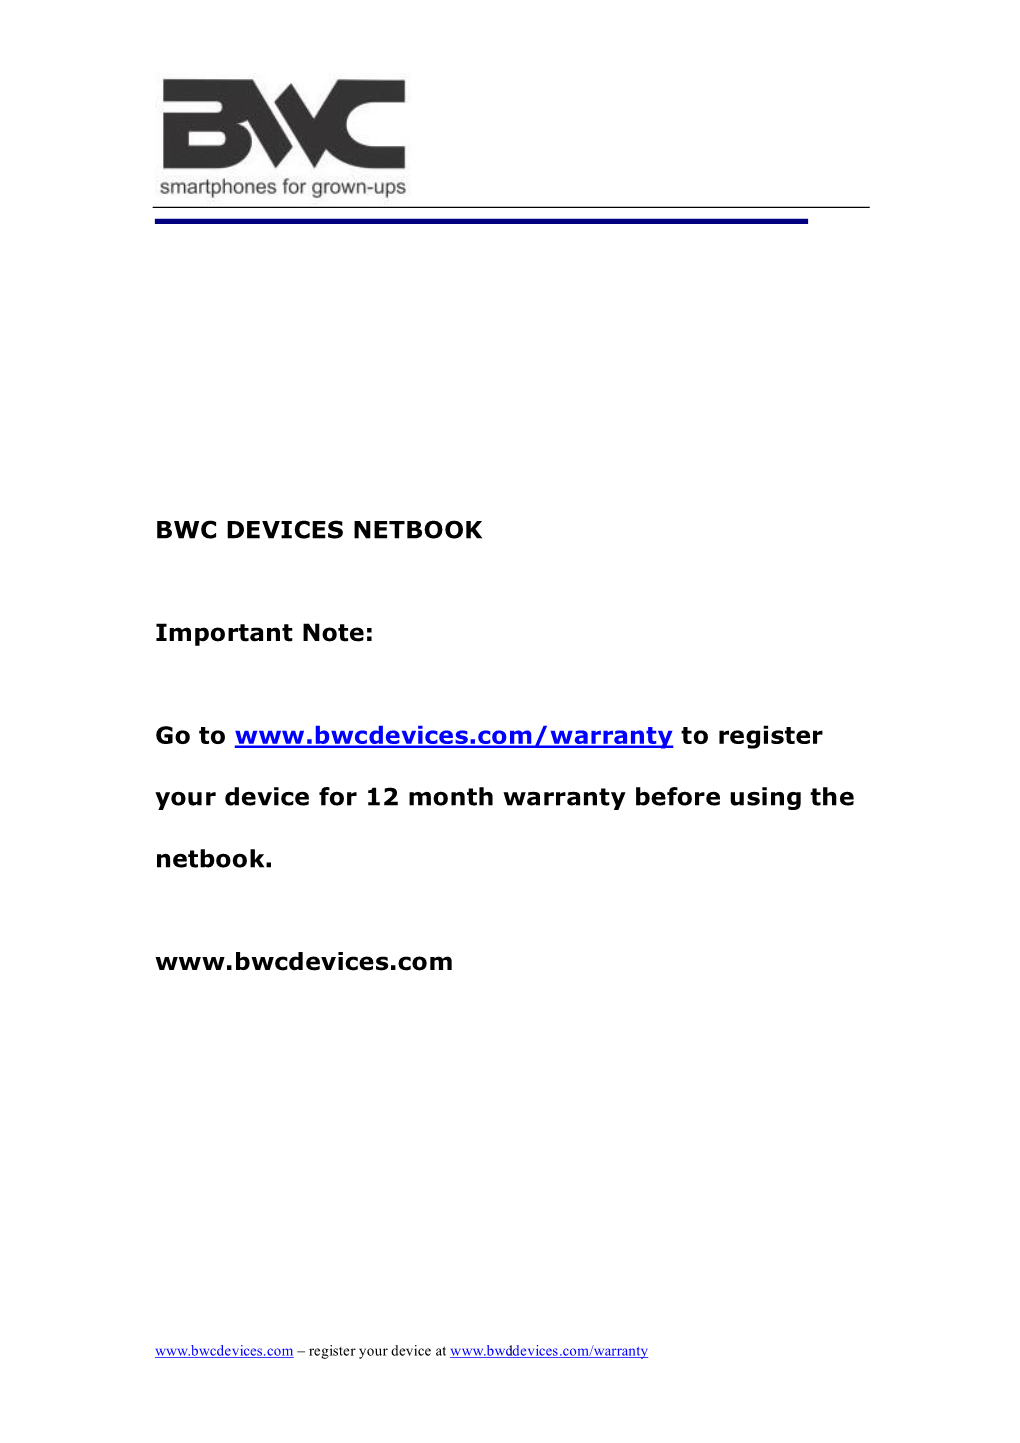 BWC DEVICES NETBOOK Important Note: Go To